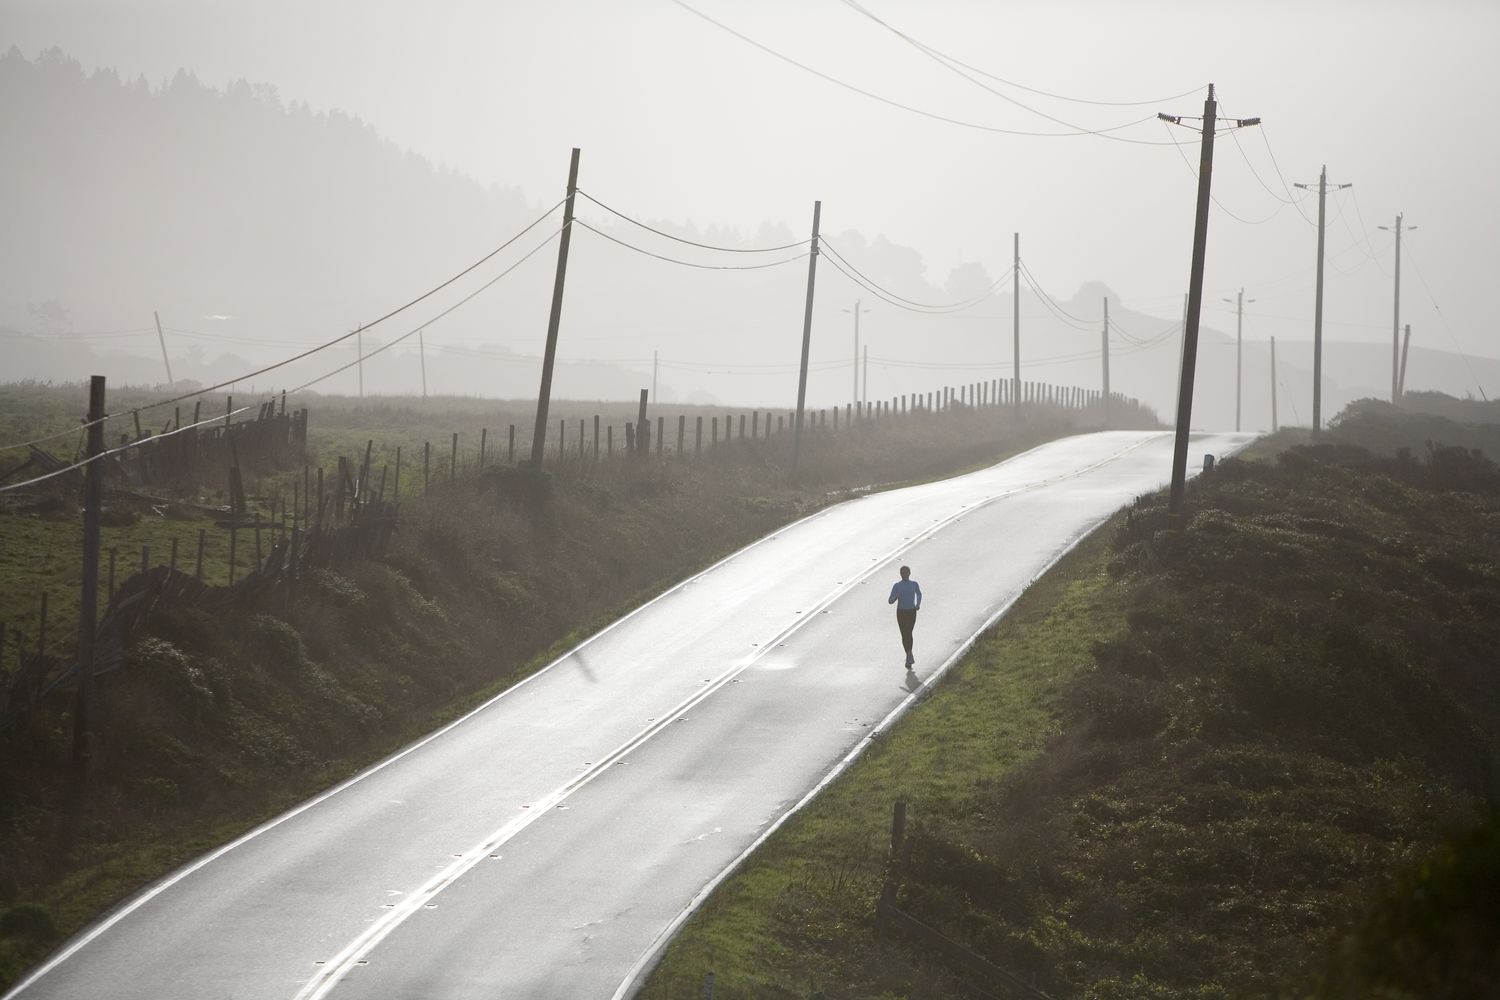 A woman runs in morning fog on deserted road with telephone or electrical poles, northern California coast. (silhouette)